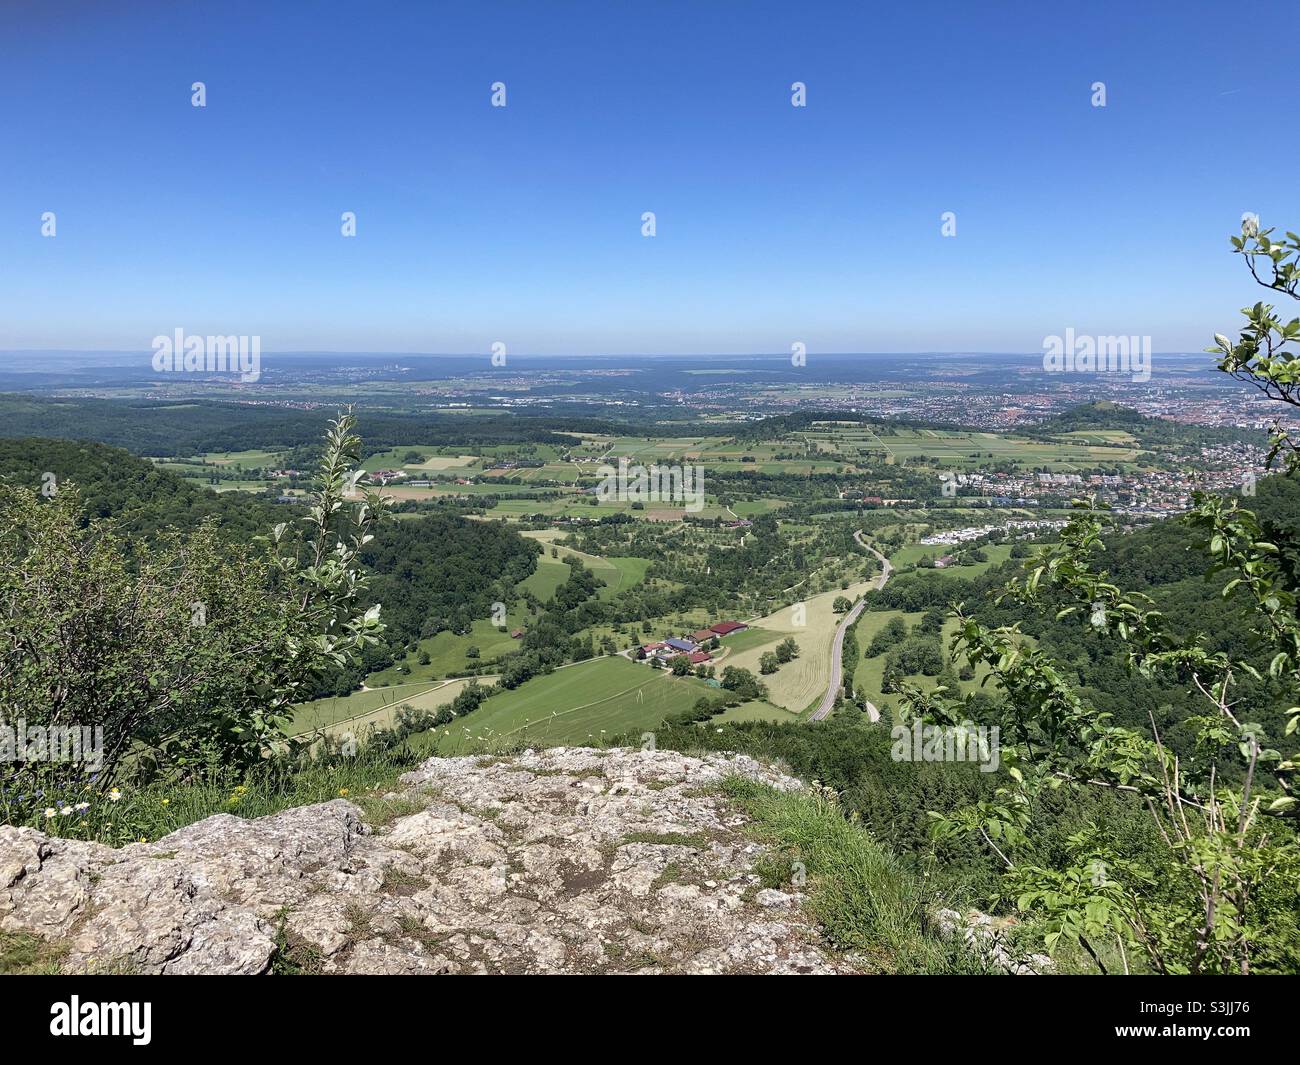 View from a cliff ledge over beautiful hilly landscape in the Swabian Alps in Southern Germany Stock Photo